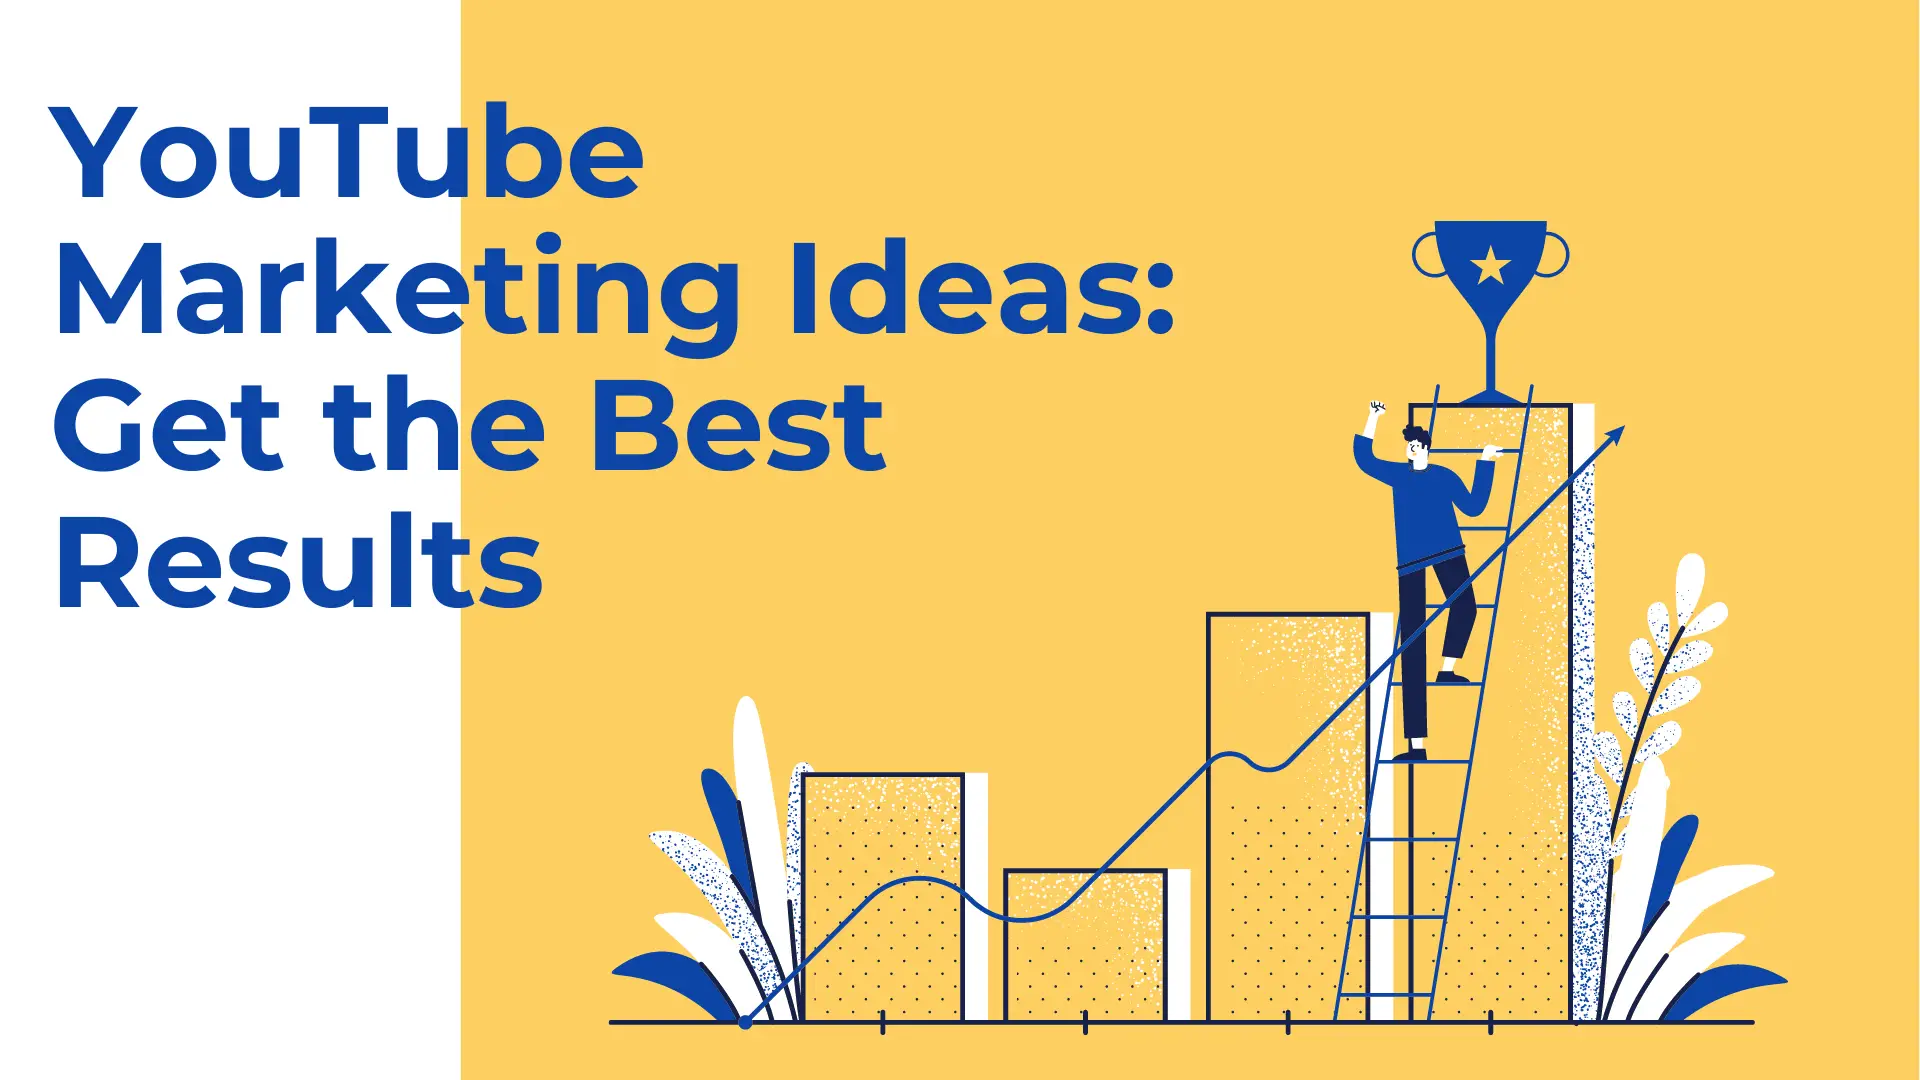 YouTube Marketing Ideas: Get the Best Results